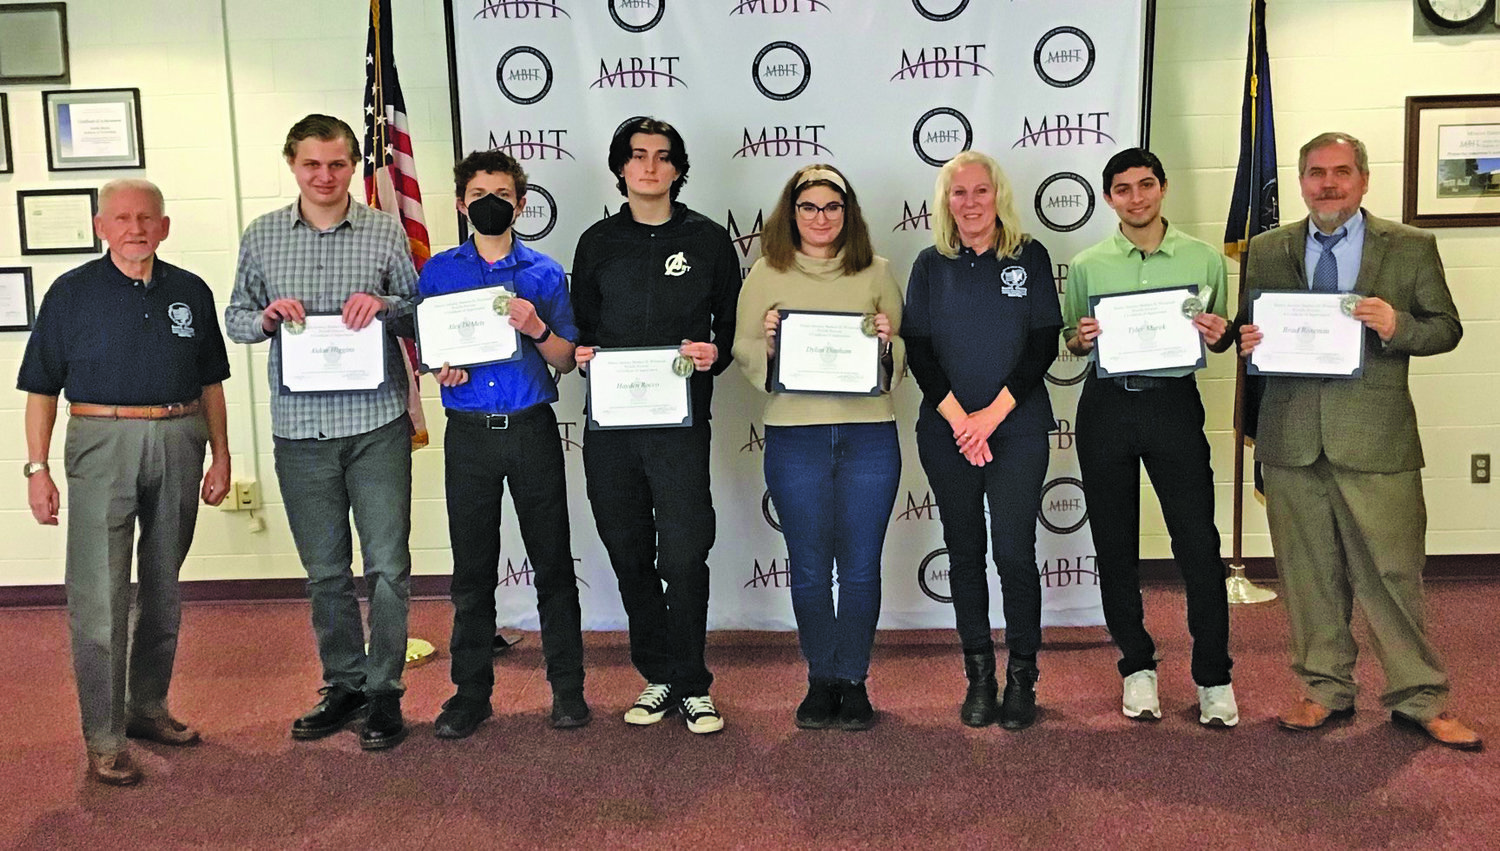 Carolyn Debuque and Elwood Hippel of the Bucks County District Attorney’s Office, Veterans Diversion Program, present student finalists with Certificates of Appreciation and the organization’s Mission Accomplished coin. From left are: Hippel, Aidan Higgins, Alex DeMets, Hayden Rocco, Dylan Dunham, Debuque, Tyler Marek and instructor Bradley Rosenau.